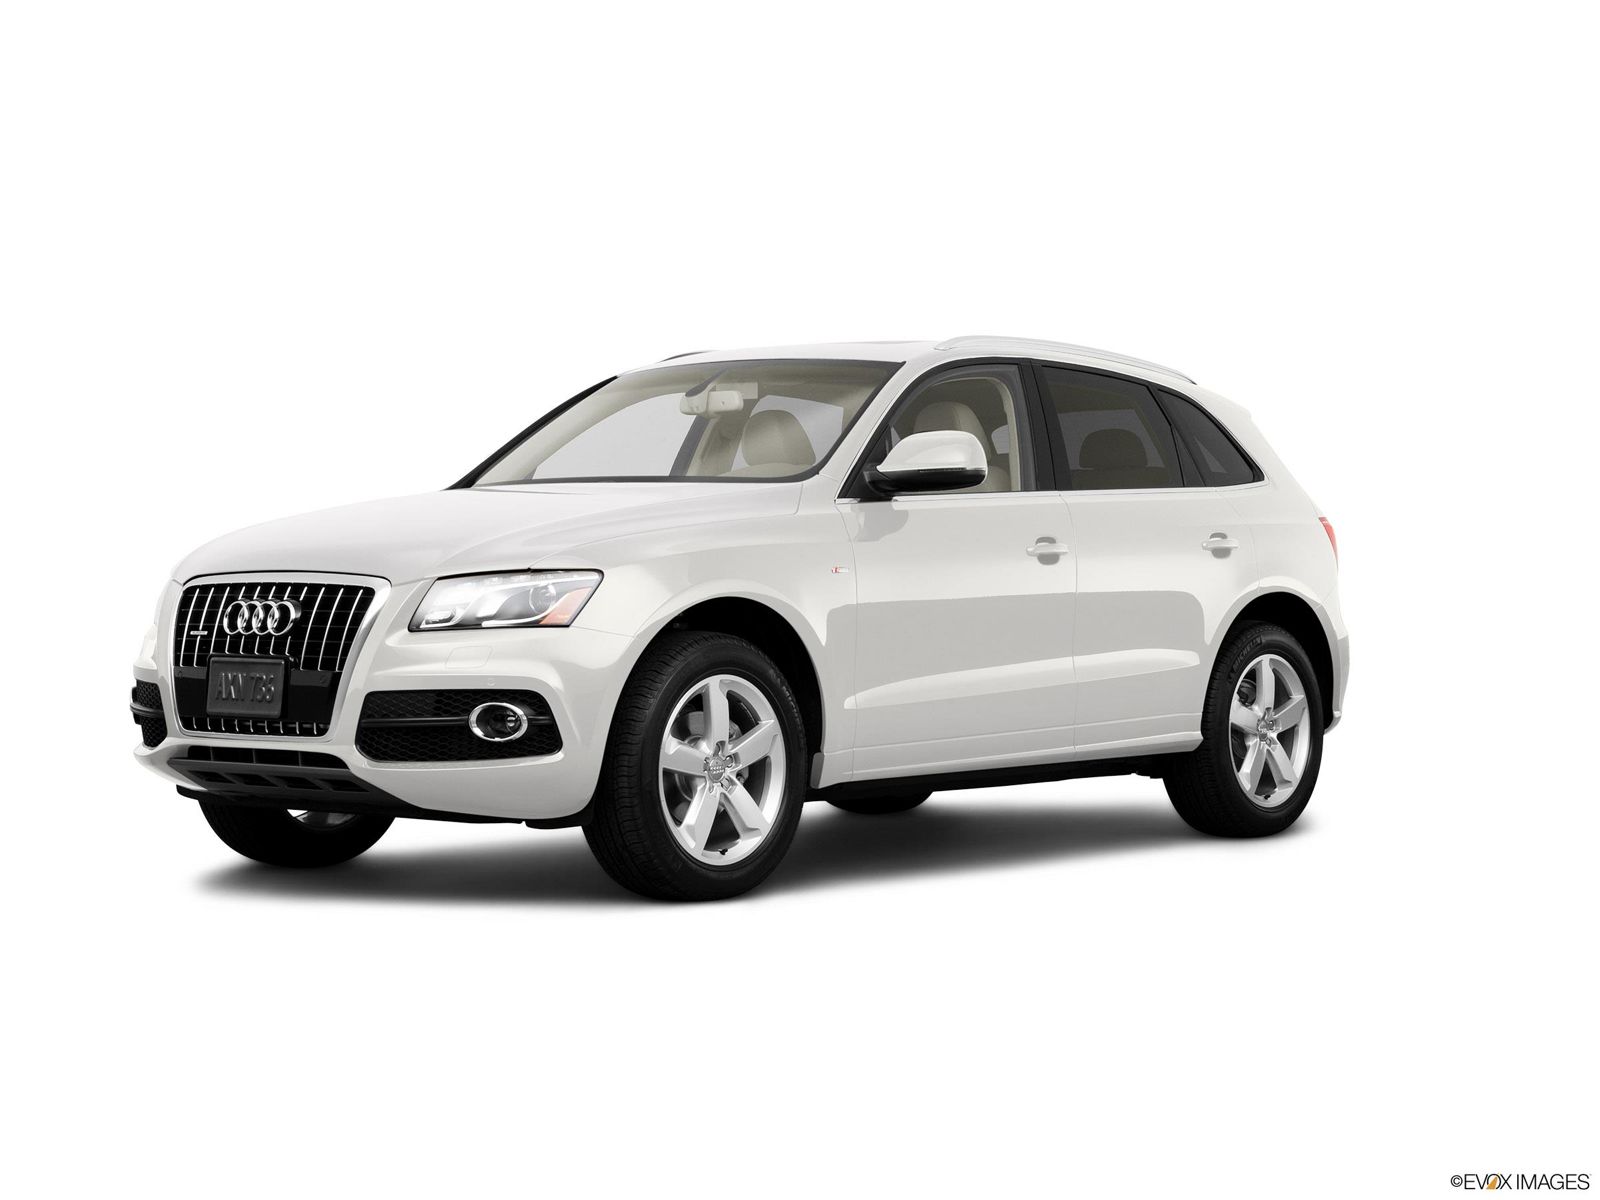 2011 Audi Q5 Research, Photos, Specs and Expertise | CarMax